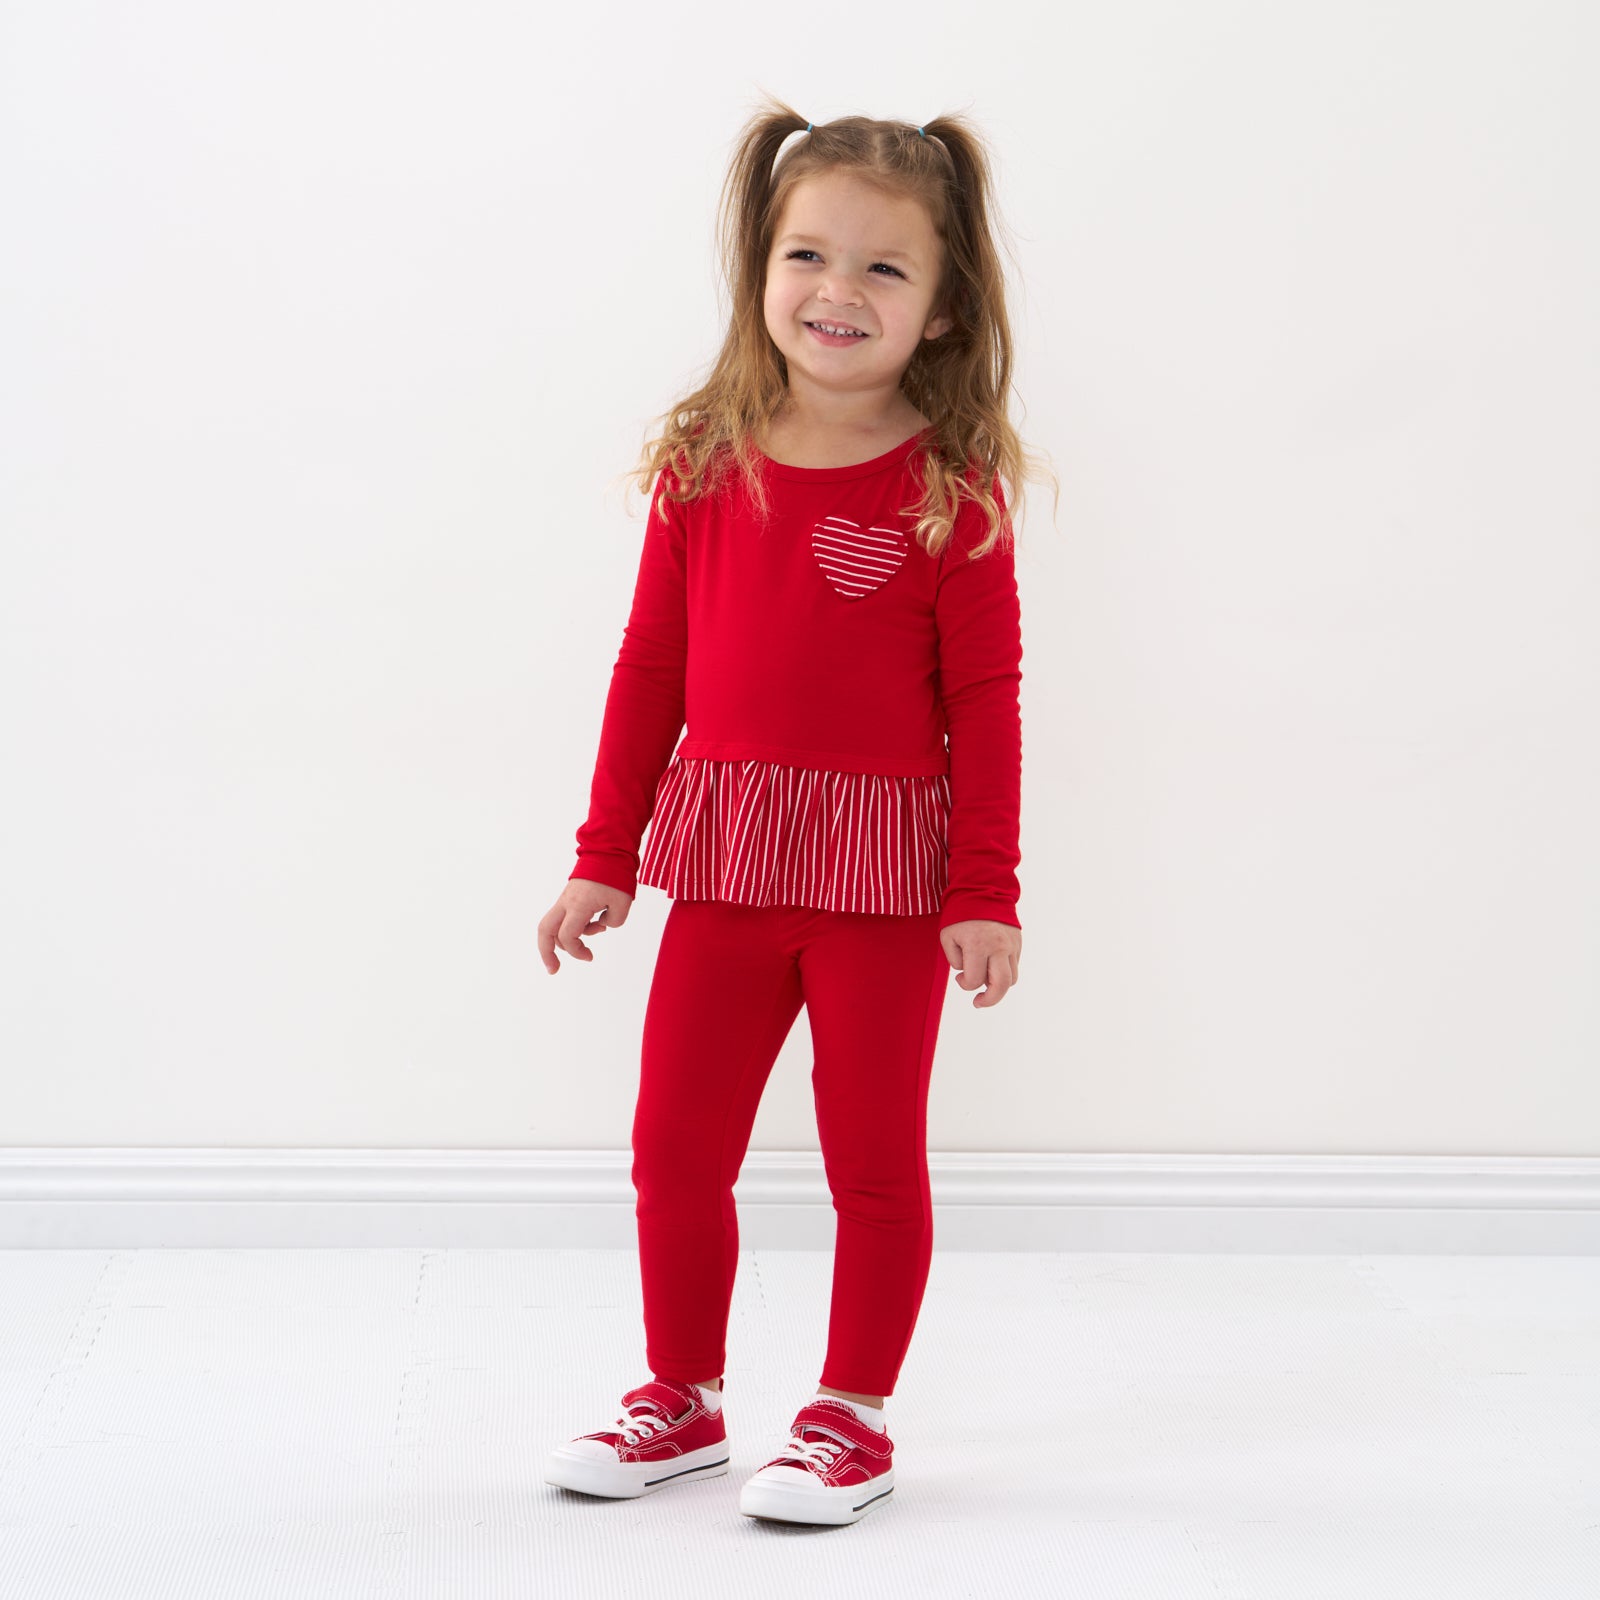 Alternate image of a child wearing Candy Red leggings and a coordinating top